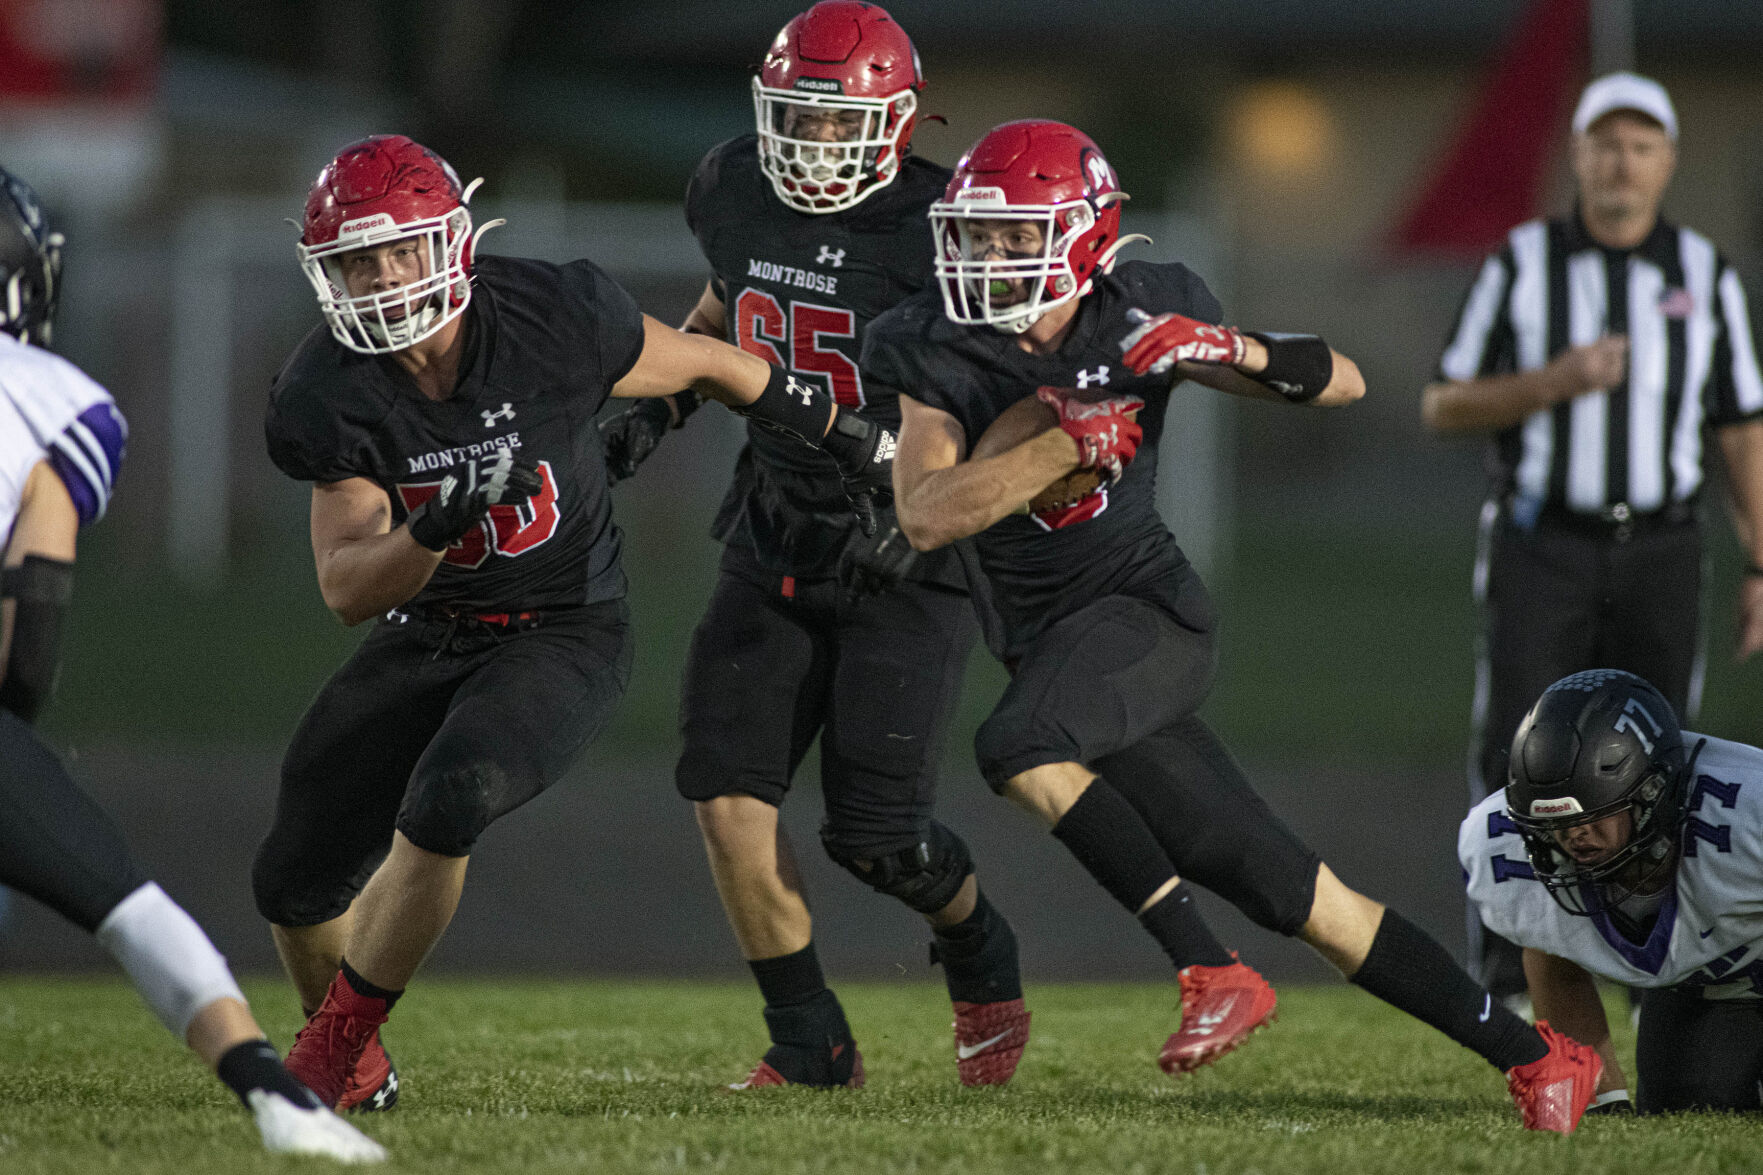 Montrose Red Hawks dominate winless Coronado with 57-8 victory